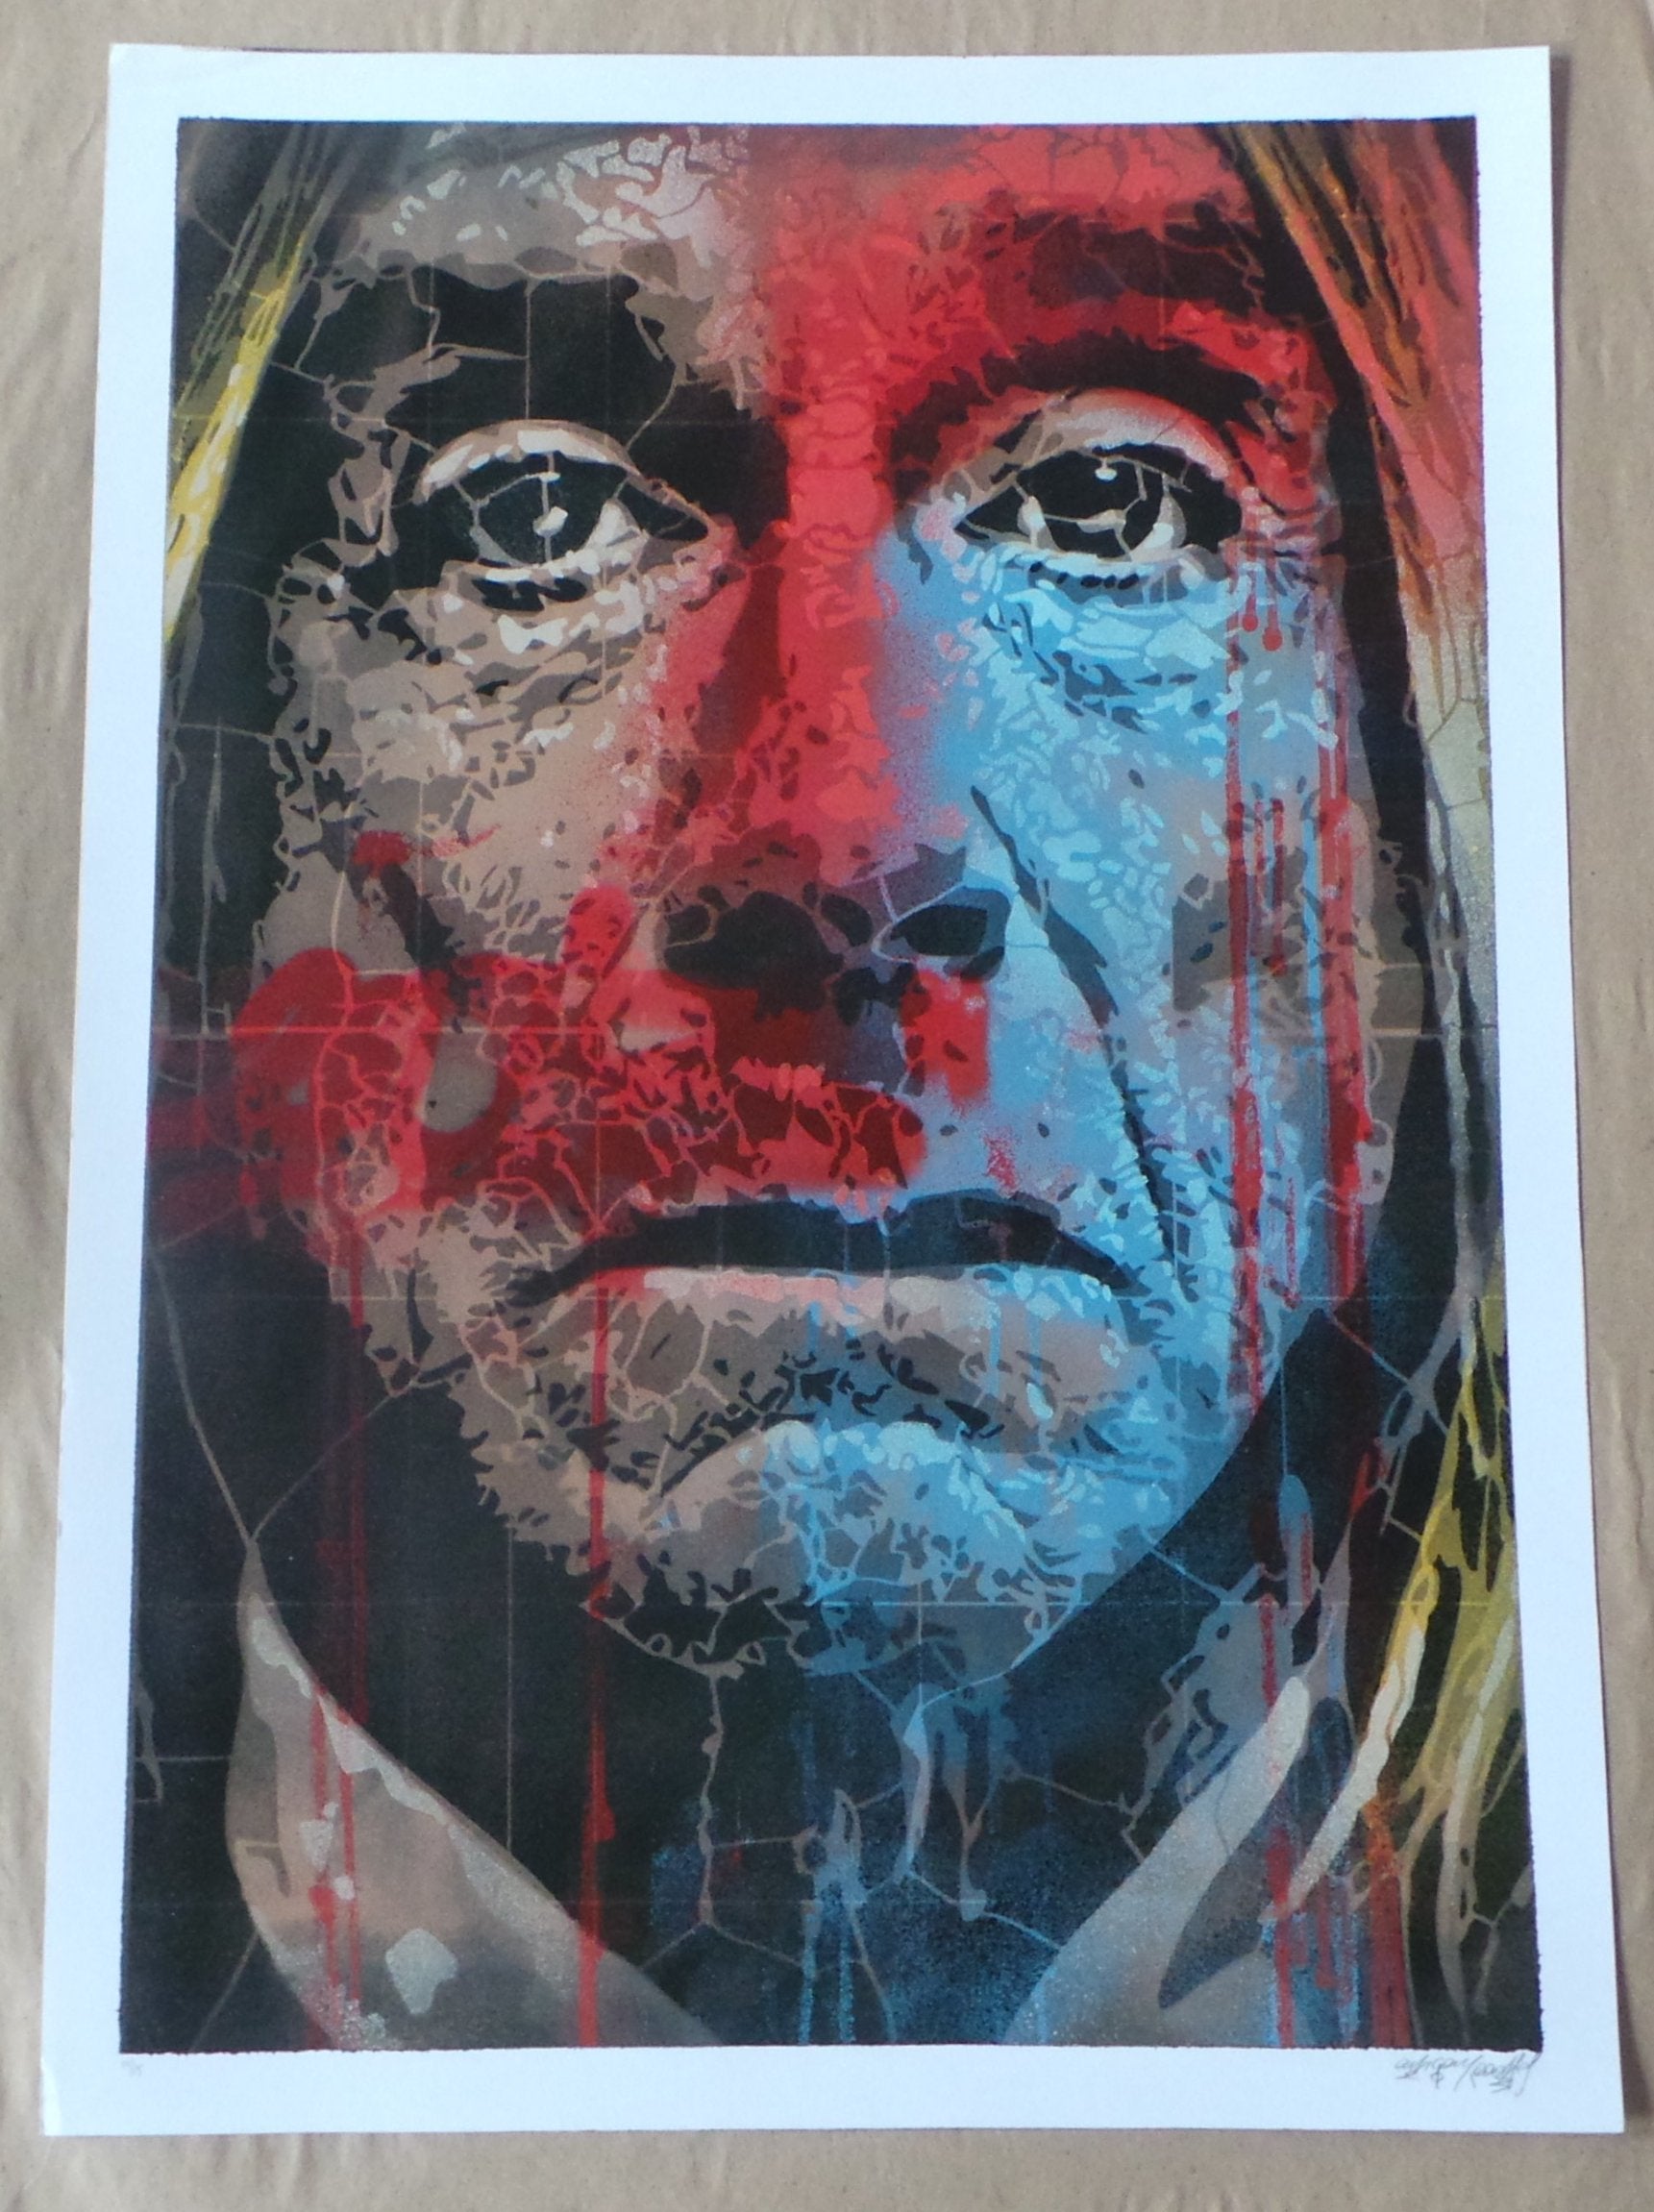 Title:  Iggy Pop  Artist:  Orticanoodles  Edition:  xx/15  Type: Screen print poster  Size: 19.5" x 27.5"  Notes:  Released in 2013 in limited run of 15 prints, signed and numbered by the artist.  The upper left-hand and lower left-hand corners of the print were damaged in shipping and creased (detailed in photographs).